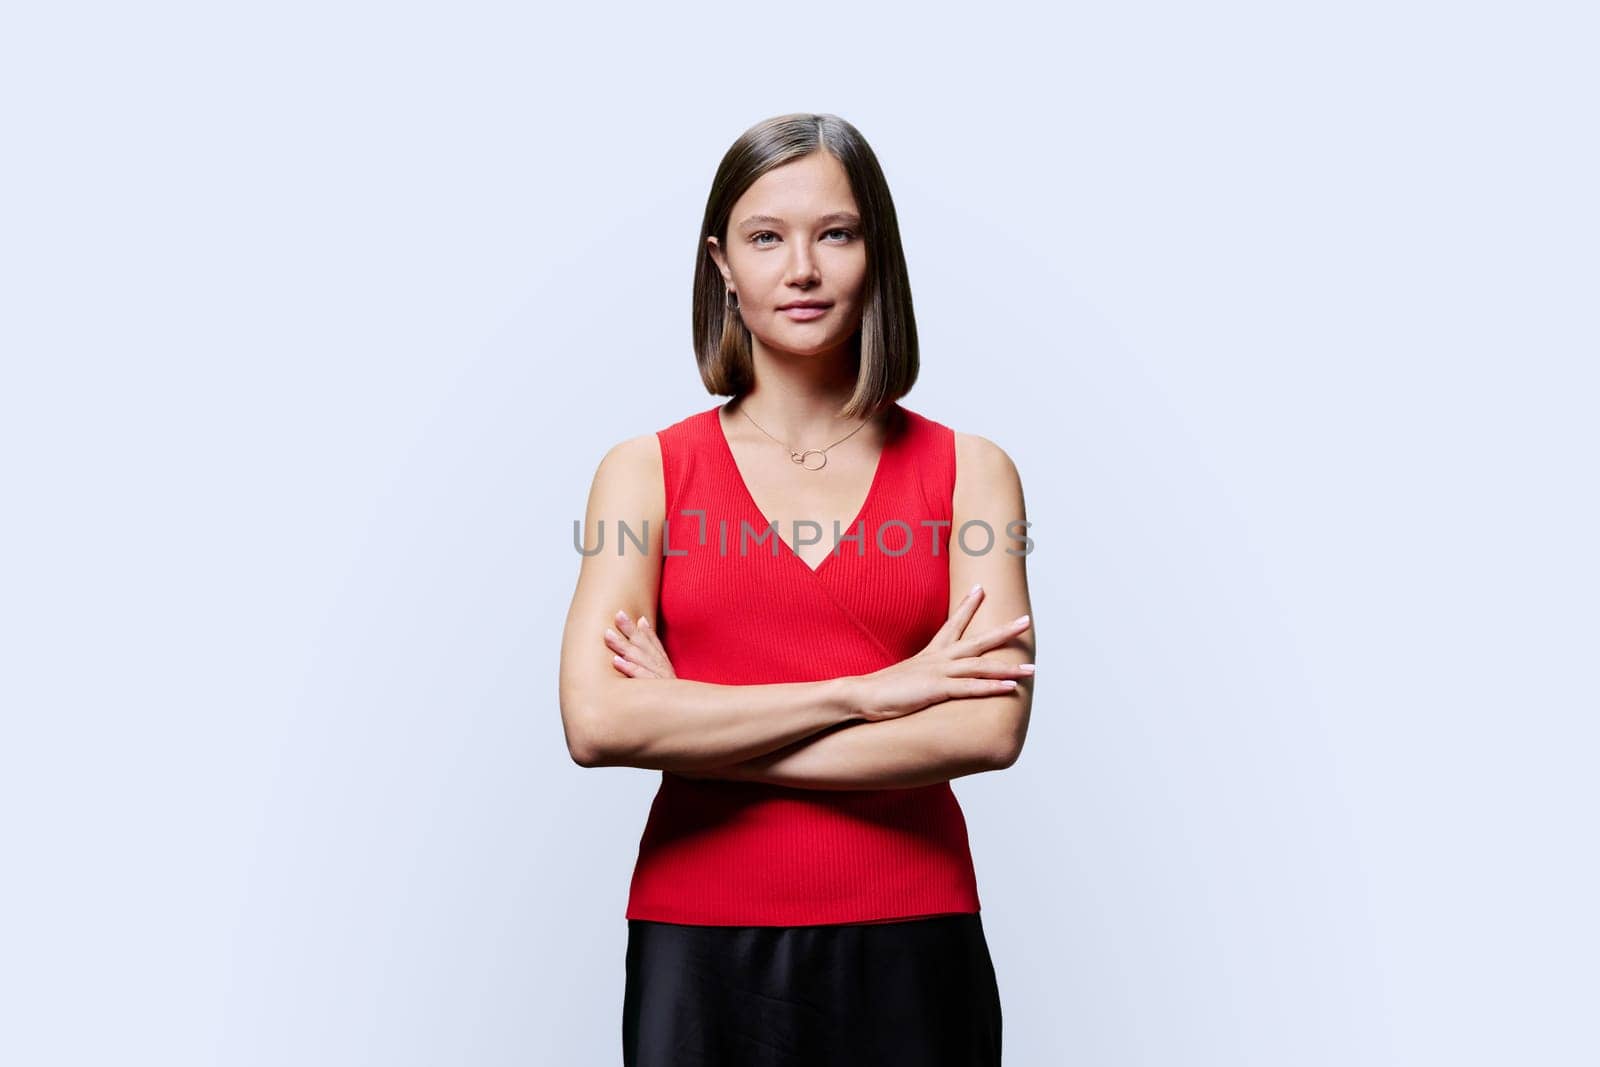 Portrait of young confident woman in red on white studio background. Successful fashionable female with crossed arms looking at camera. Business, work, services, education, fashion beauty professions